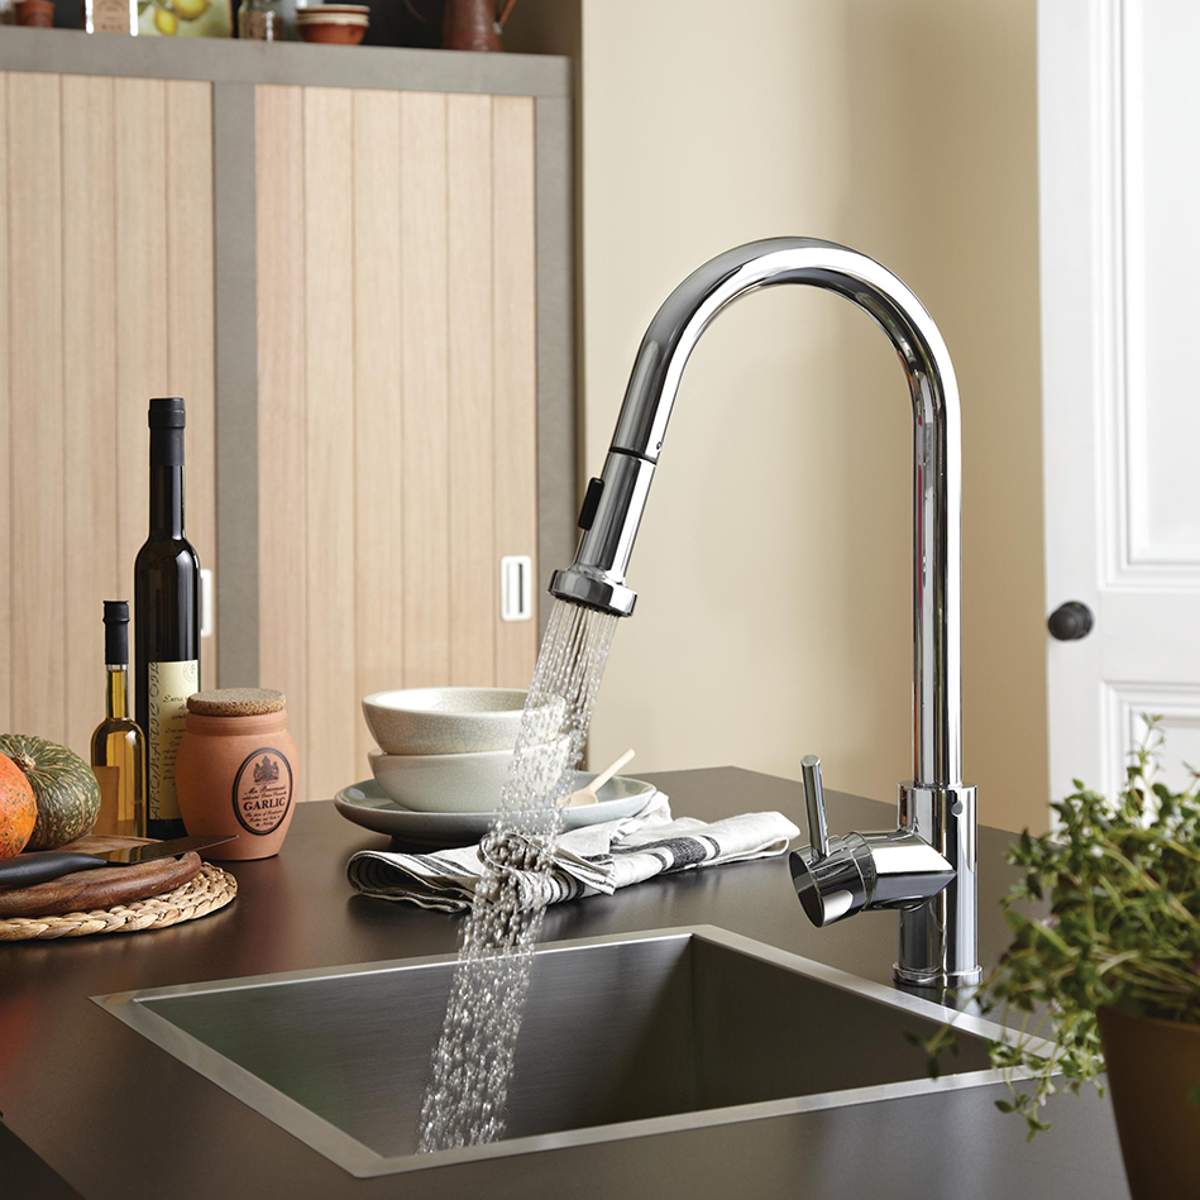 Bristan Apricot Professional Sink Mixer with Pull-Out Spray (APR PULLSNK C)